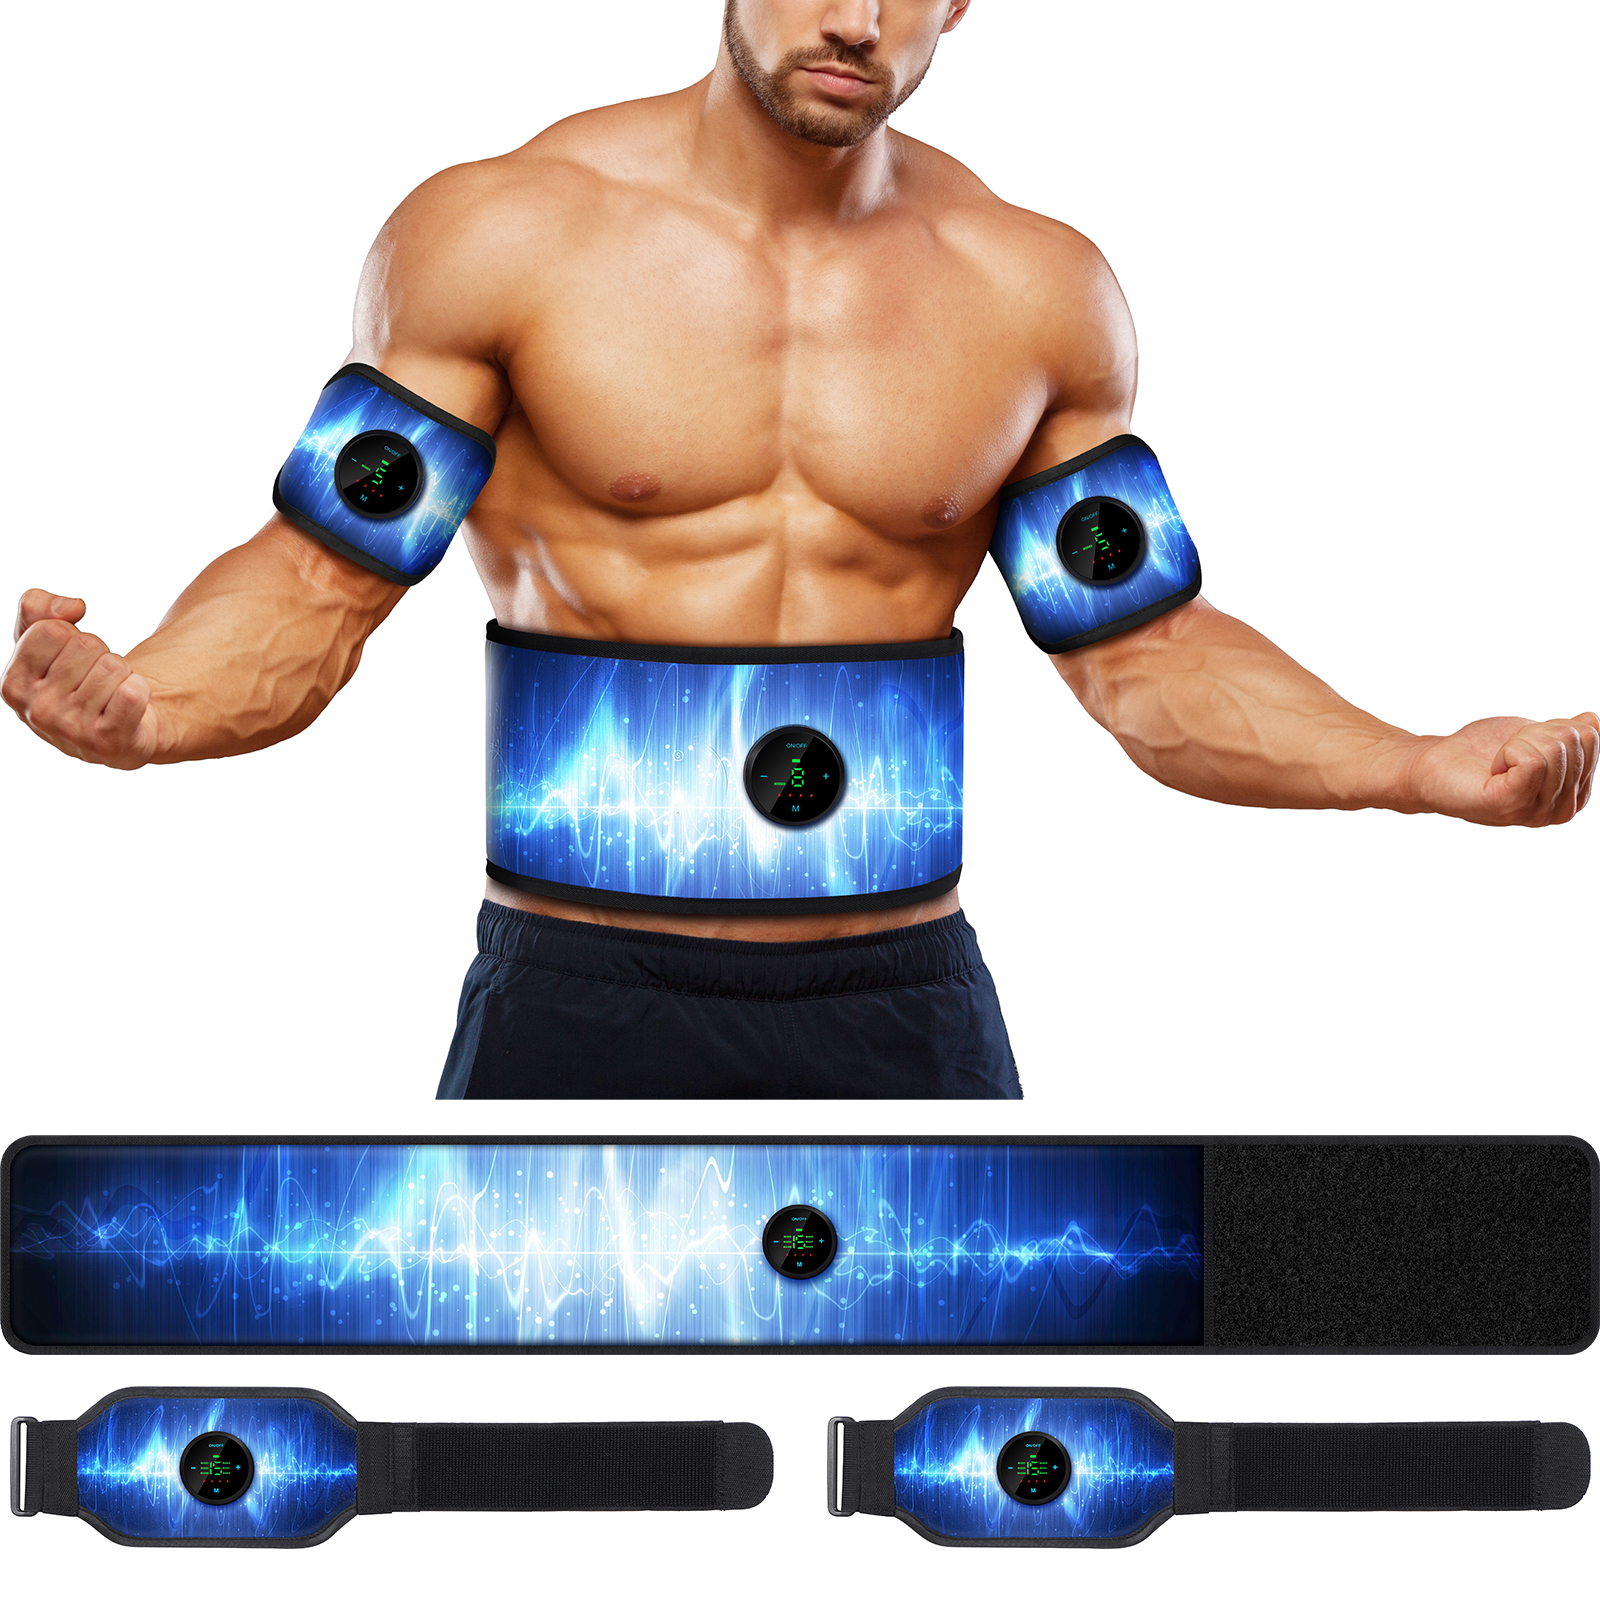  Muscle Toner ABS Training Workout Belt Body Abdominal